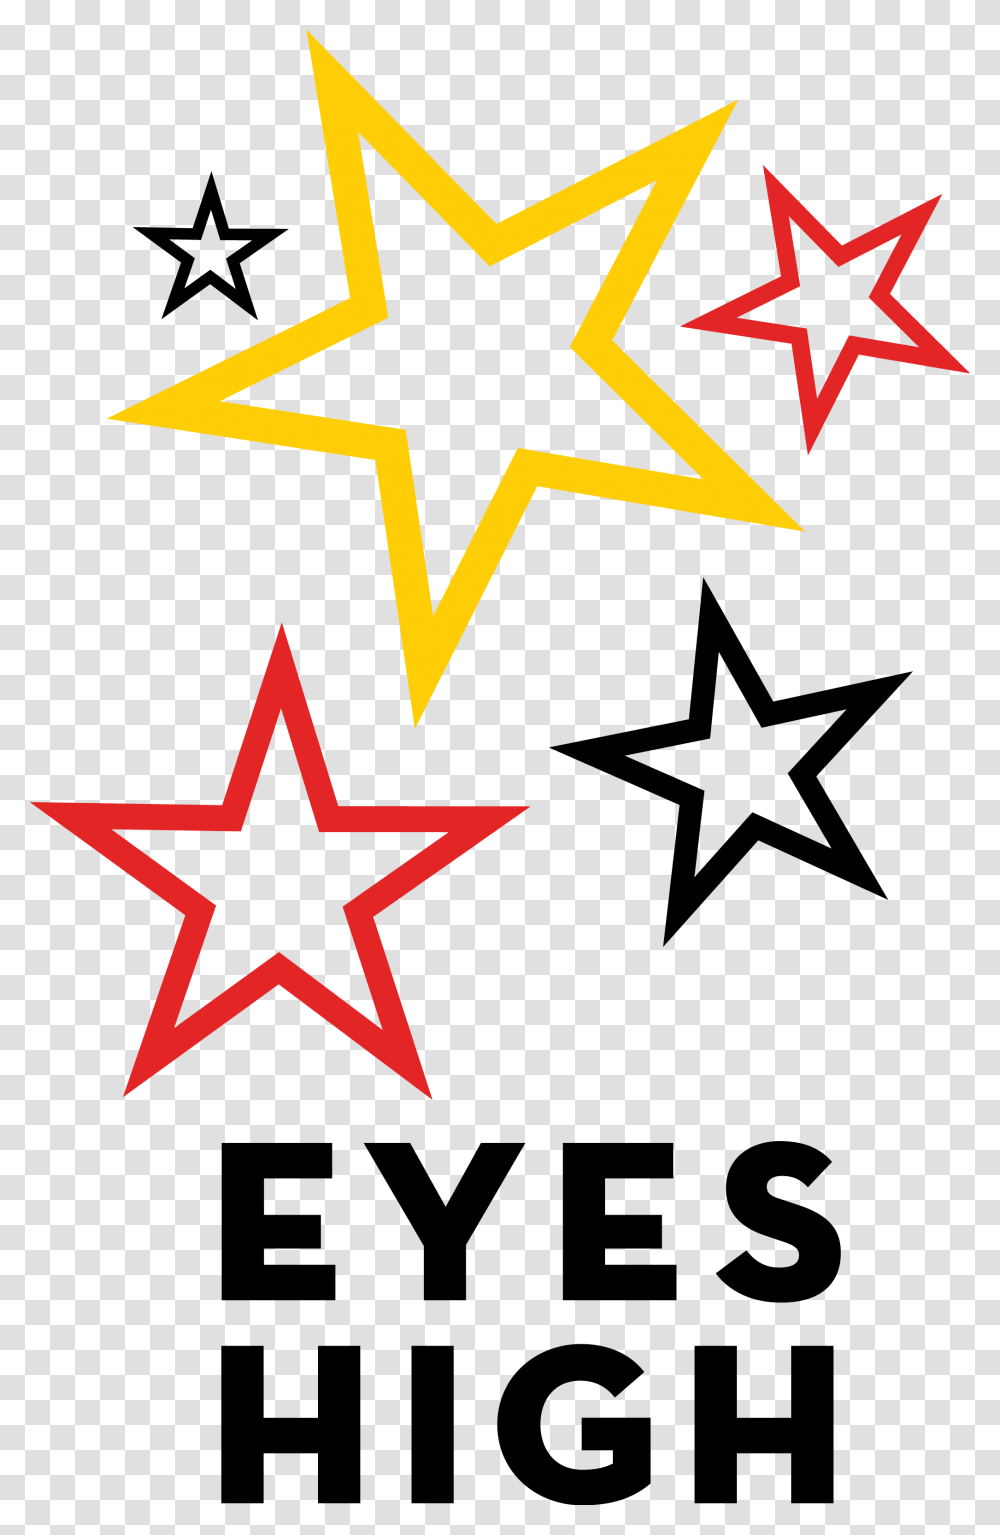 Eyes High Cccp Hammer And Sickle, Star Symbol Transparent Png